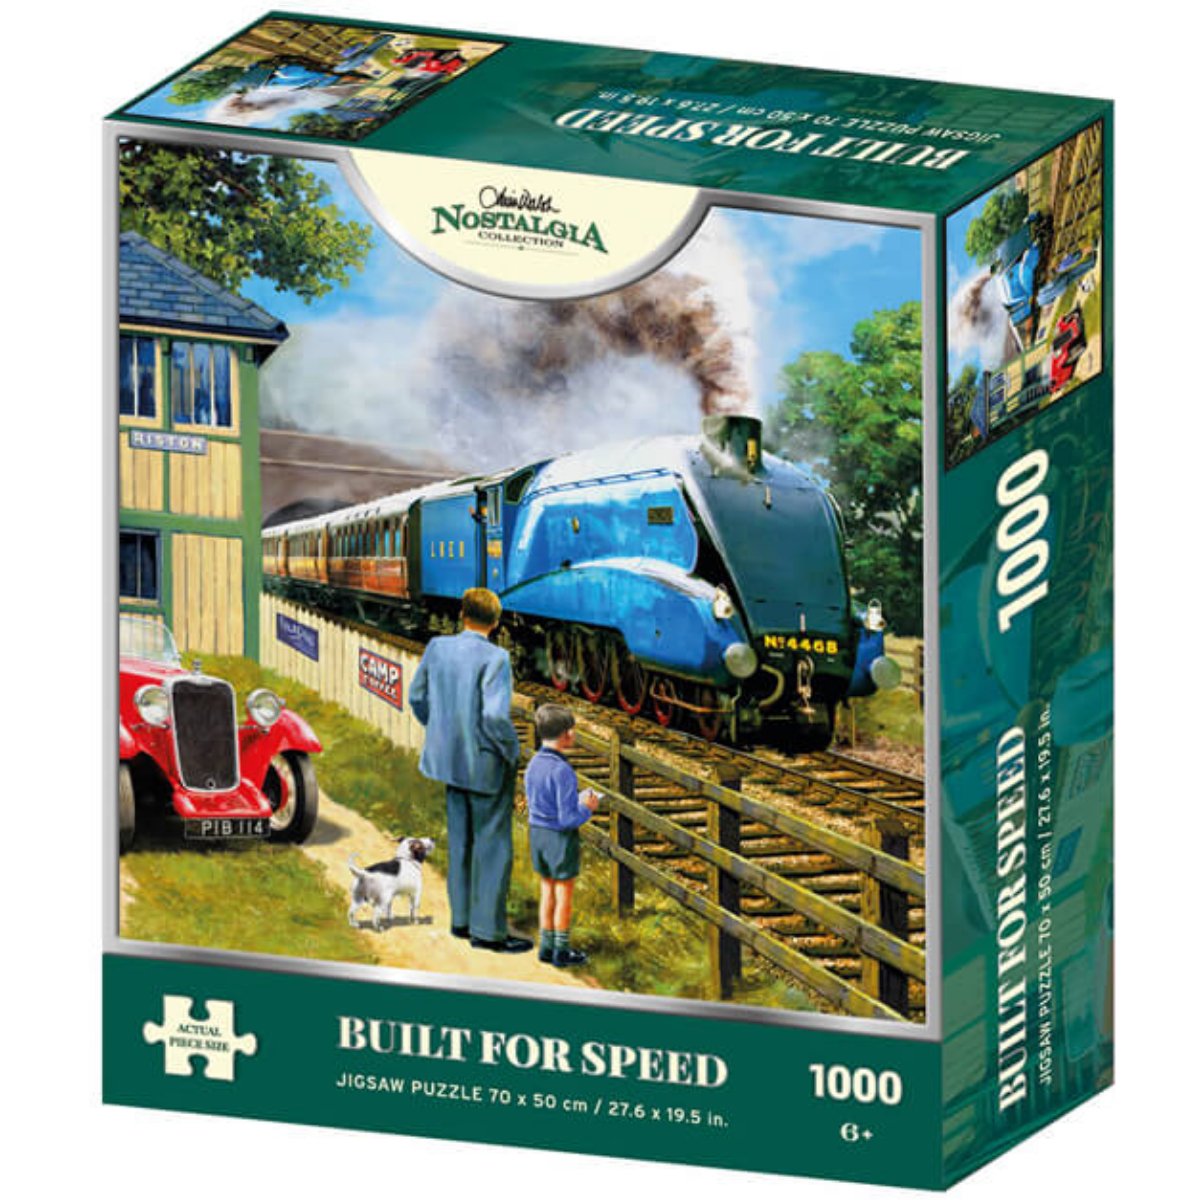 Built For Speed - Kevin Walsh 1000 Piece Jigsaw Puzzle - Phillips Hobbies